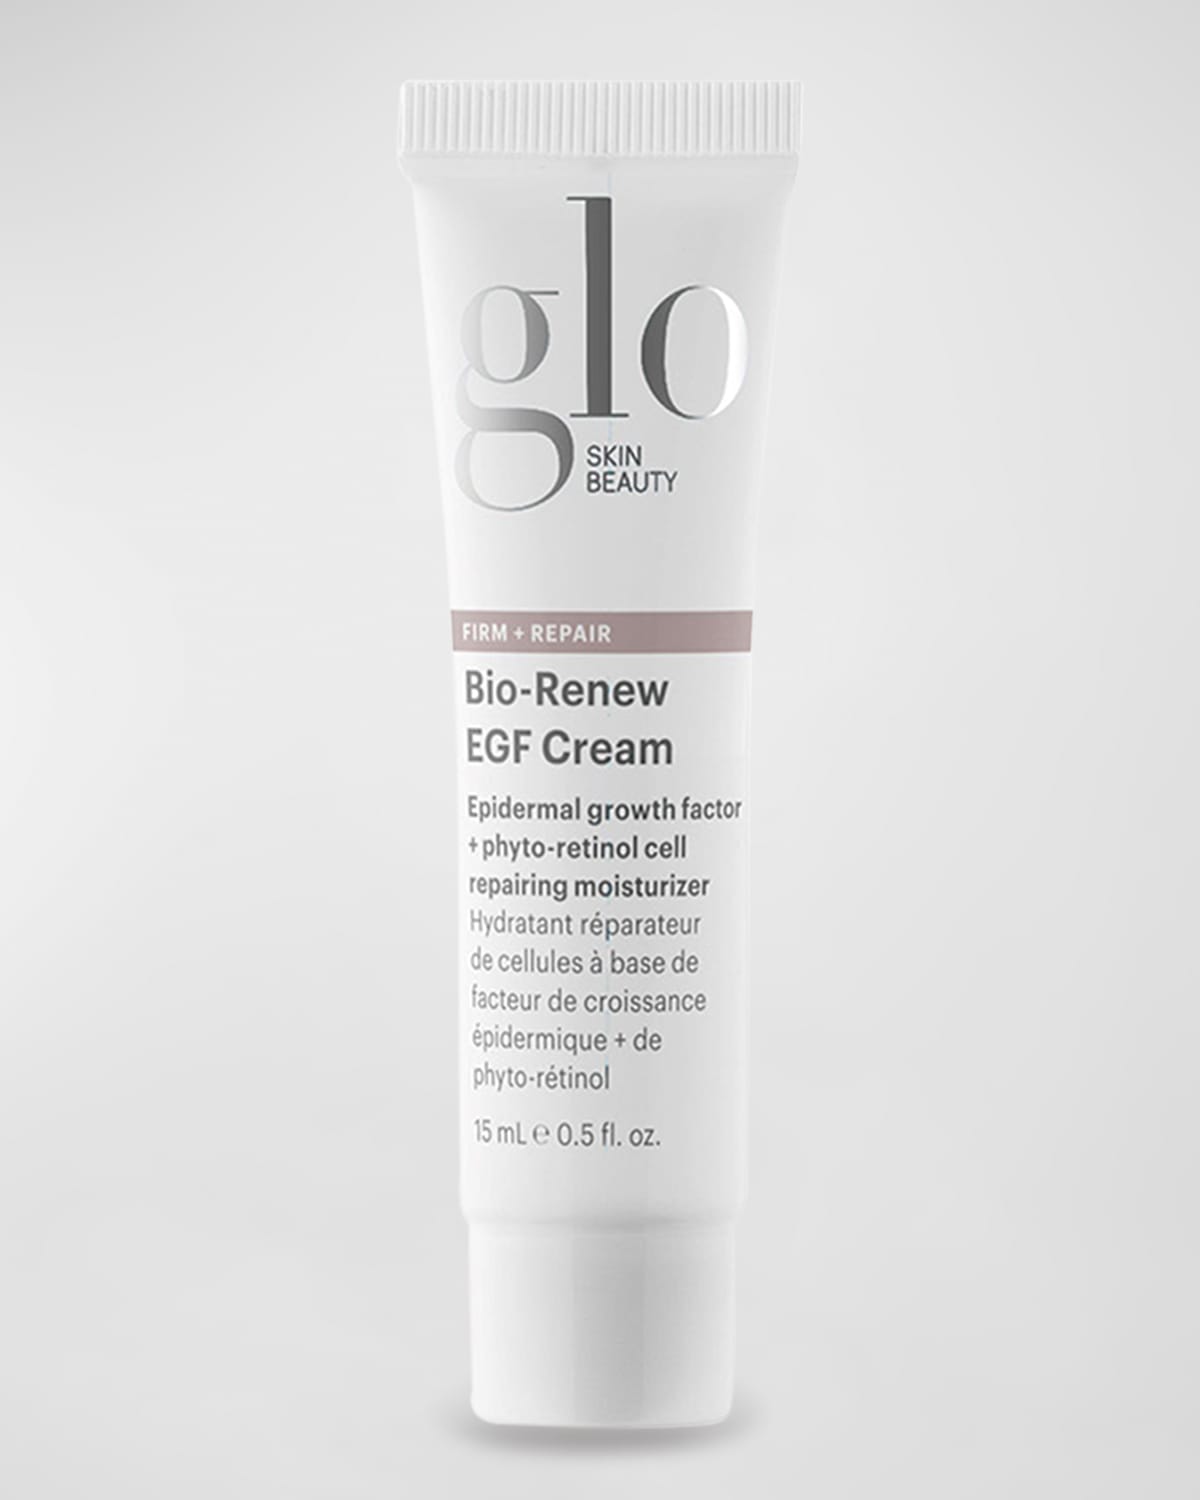 0.5 oz. Bio-Renew EGF Cream, Yours with any $75 Glo Skin Beauty Purchase